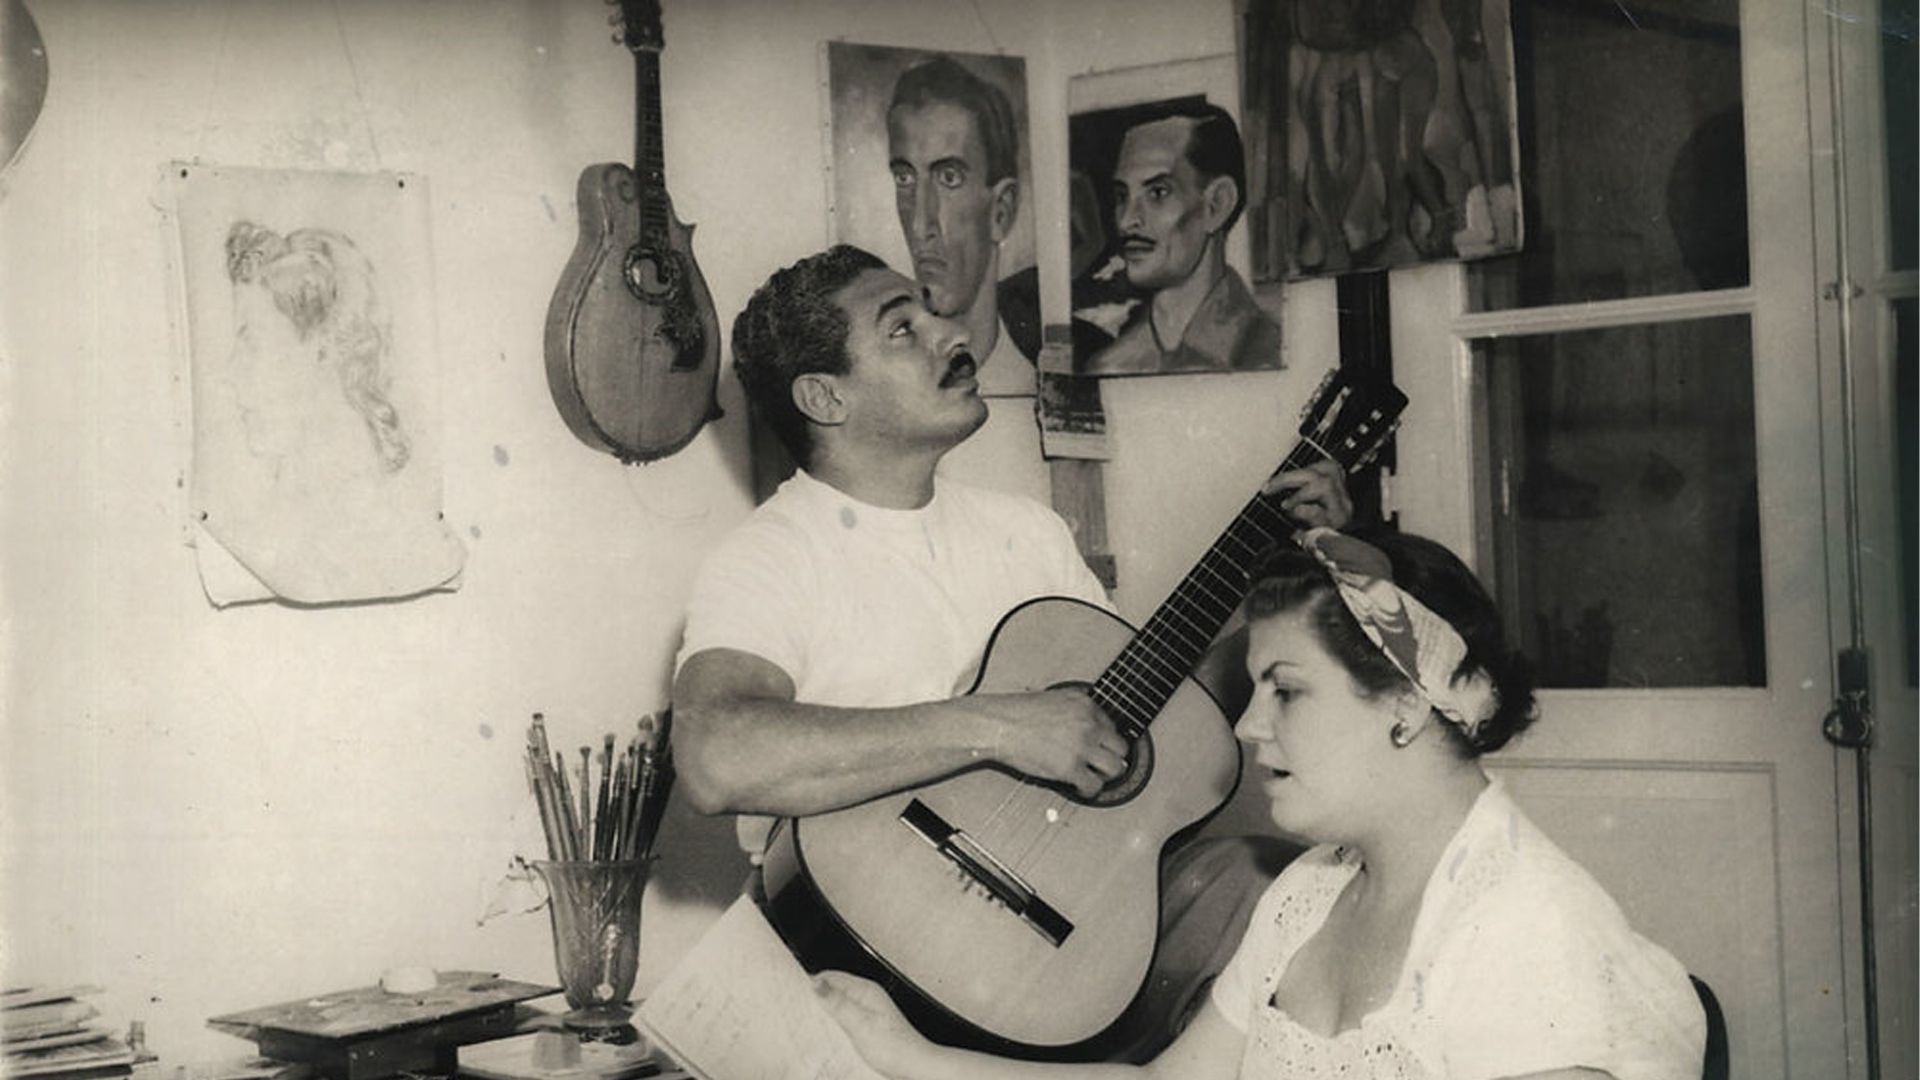 A man is playing a guitar to a woman in a black and white photo